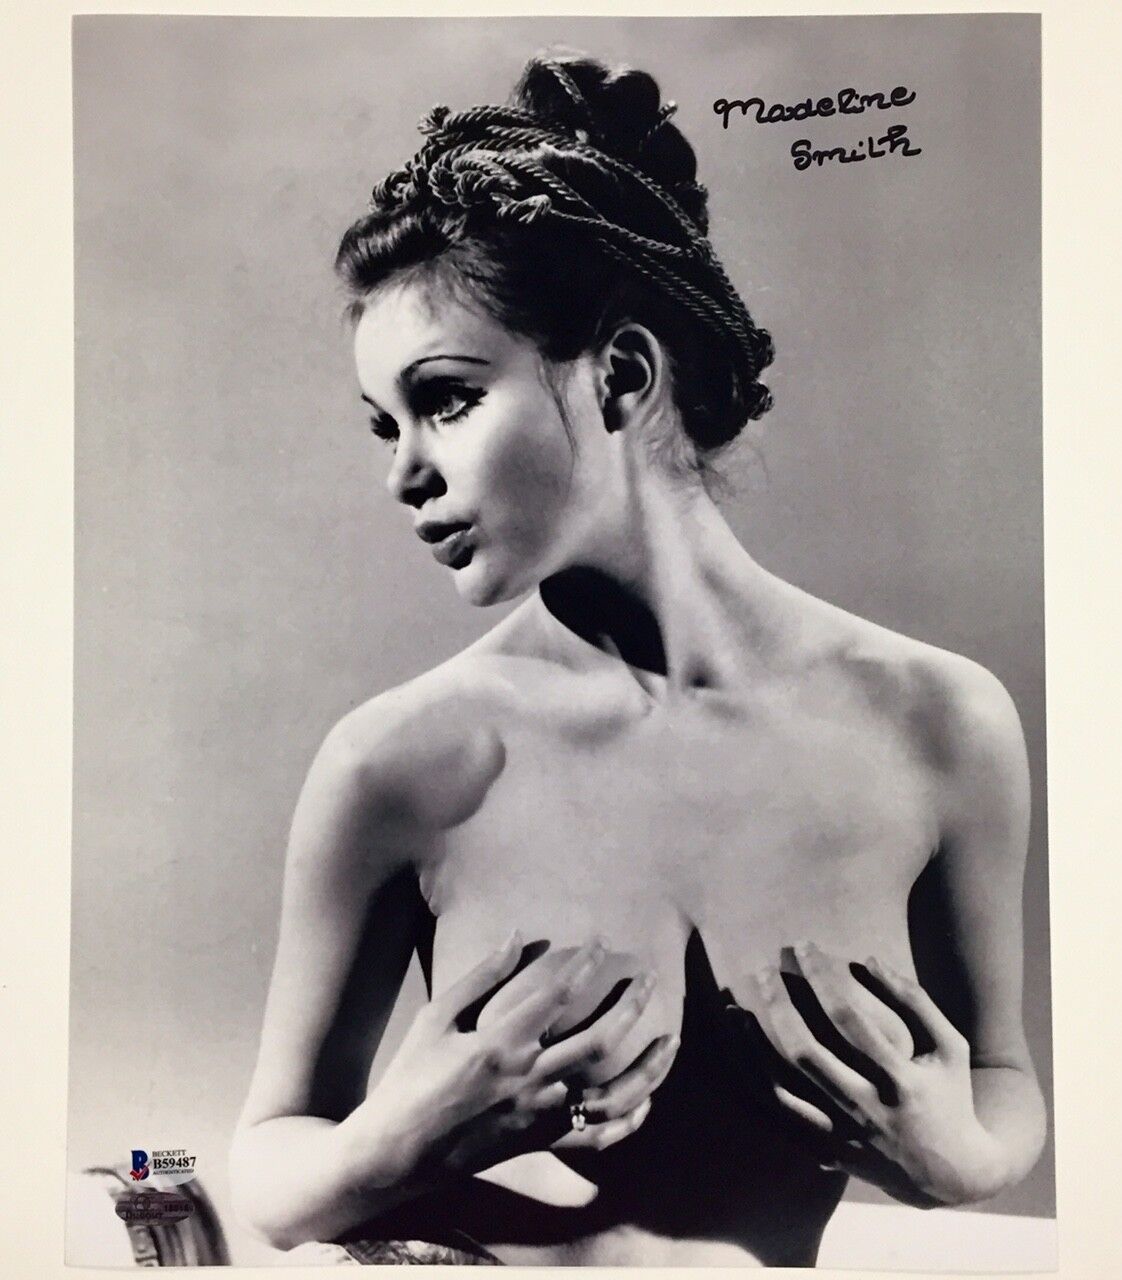 MADELINE SMITH James Bond Girl MISS CARUSO Signed 11x14 Photo Poster painting ~ Beckett BAS COA